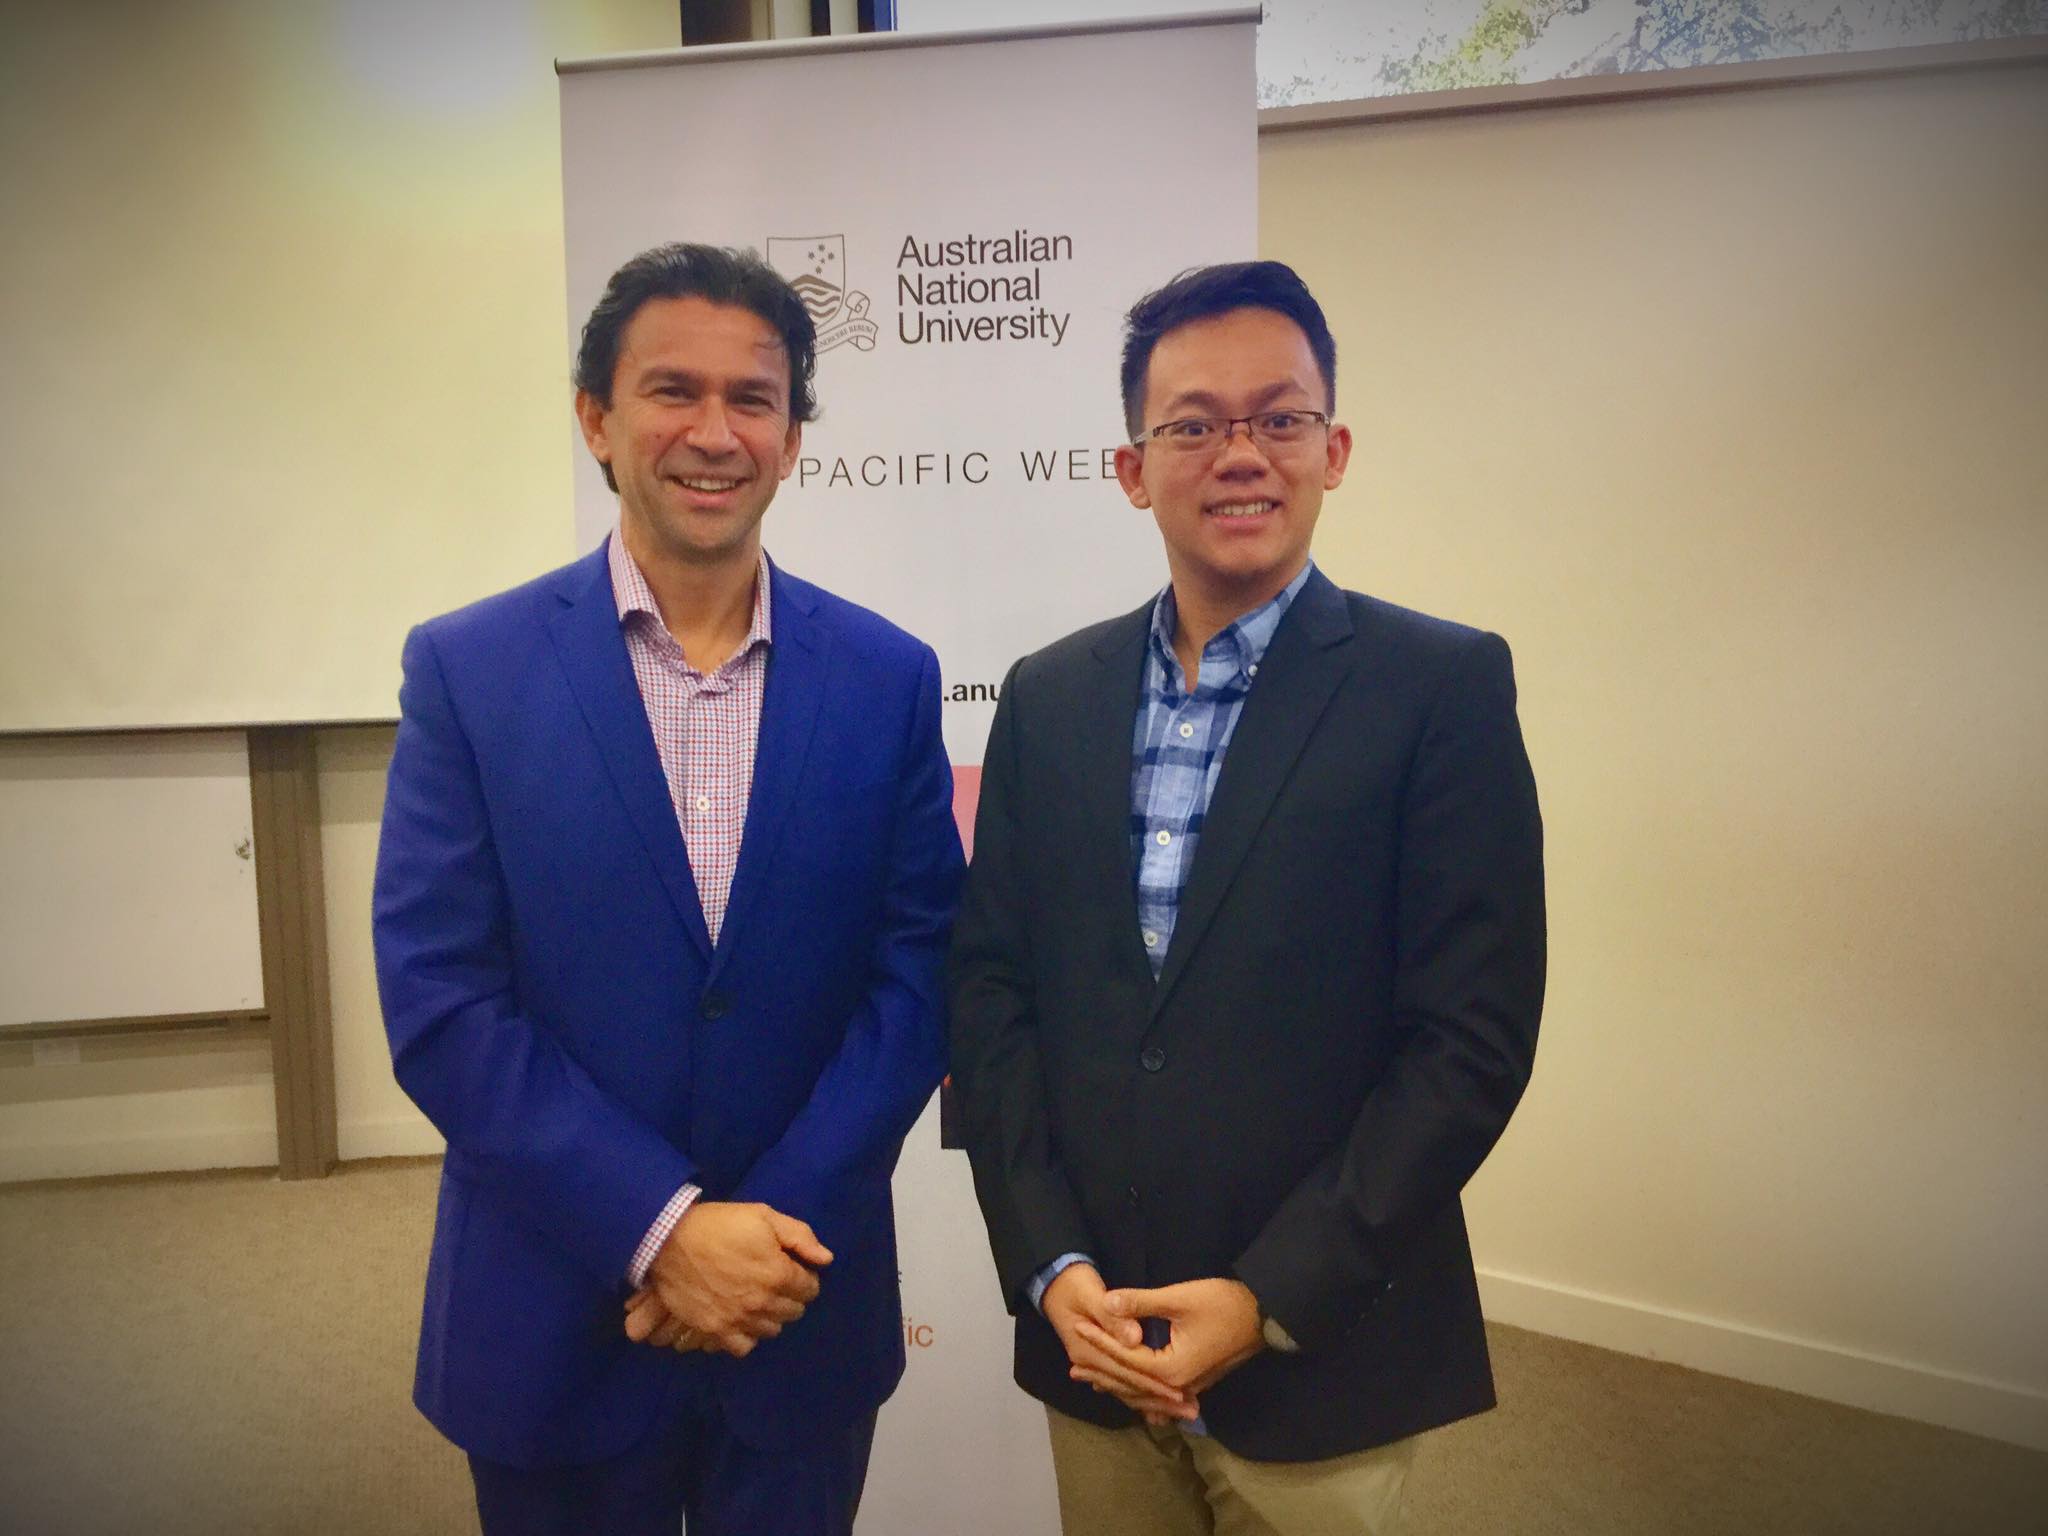 Le Tu Trinh Quy is pictured alongside Professor Michael Wesley, Dean of the College of Asia and the Pacific, Australian National University, at the opening ceremony of Asia-Pacific Week 2017.